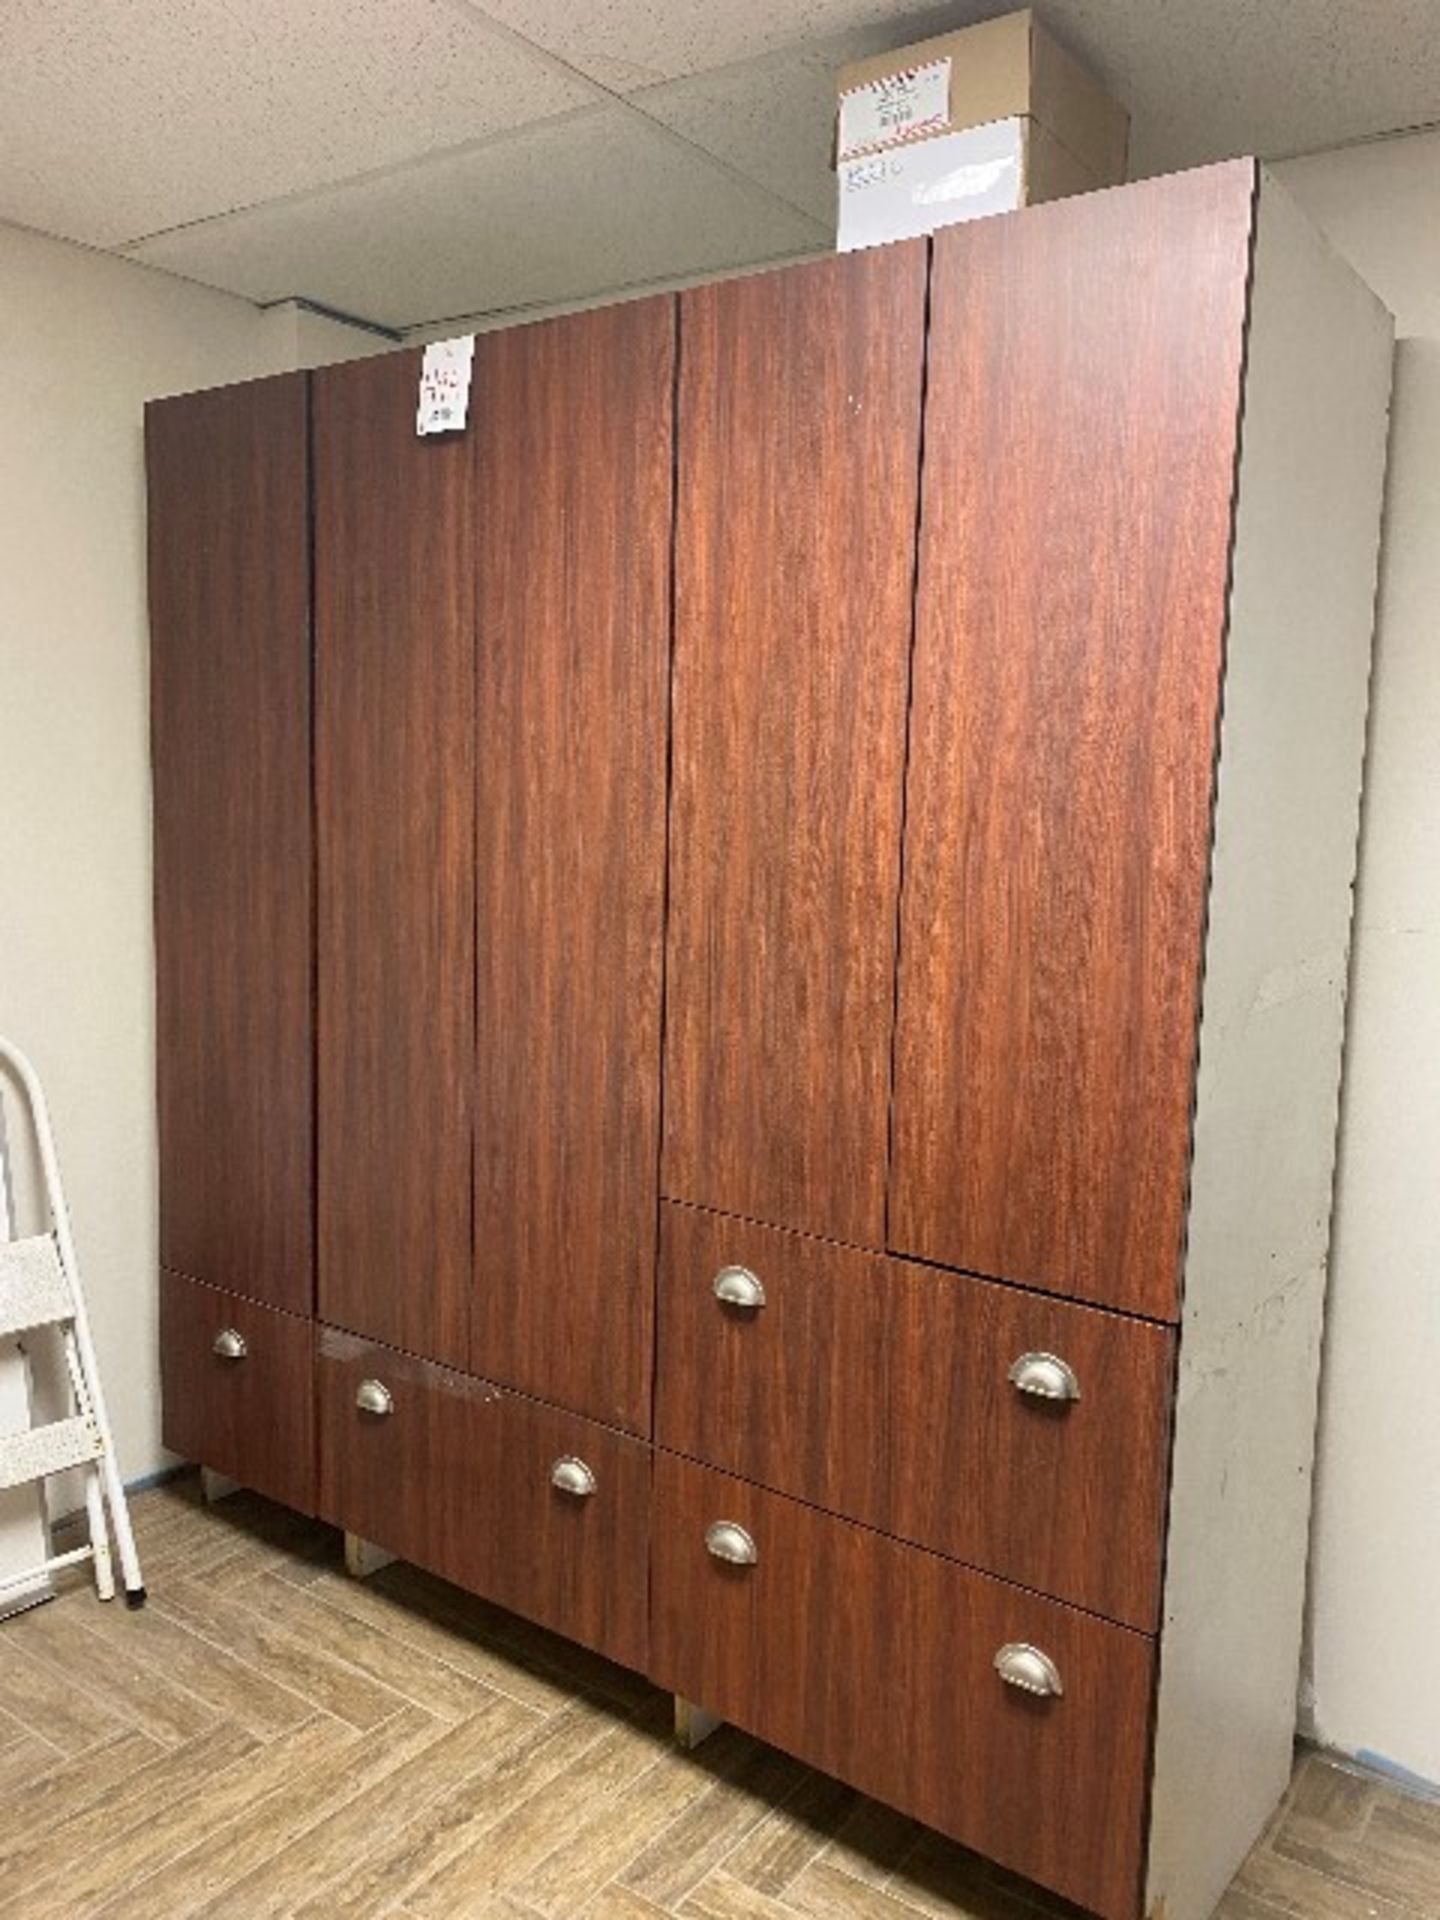 LOT, Storage cabinets, 3 sections